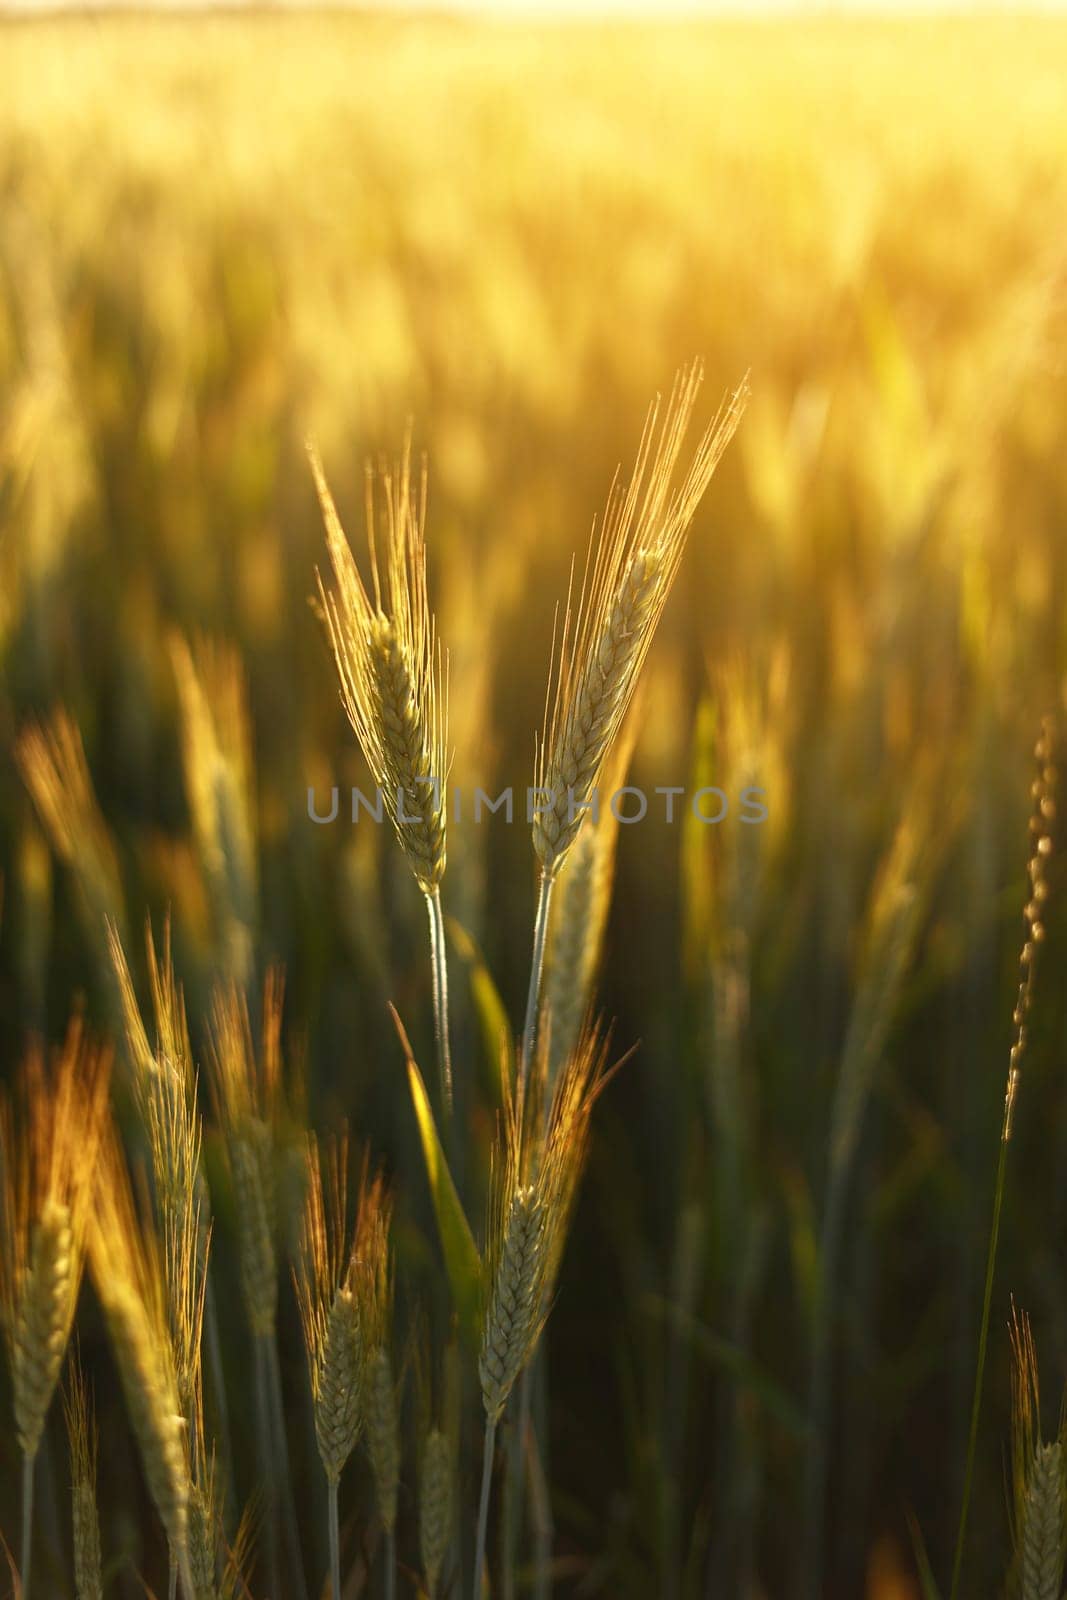 Wheat field. Ears of golden wheat close up. Beautiful Nature Sunset Landscape. Rural Scenery under Shining Sunlight. Background of ripening ears of wheat field